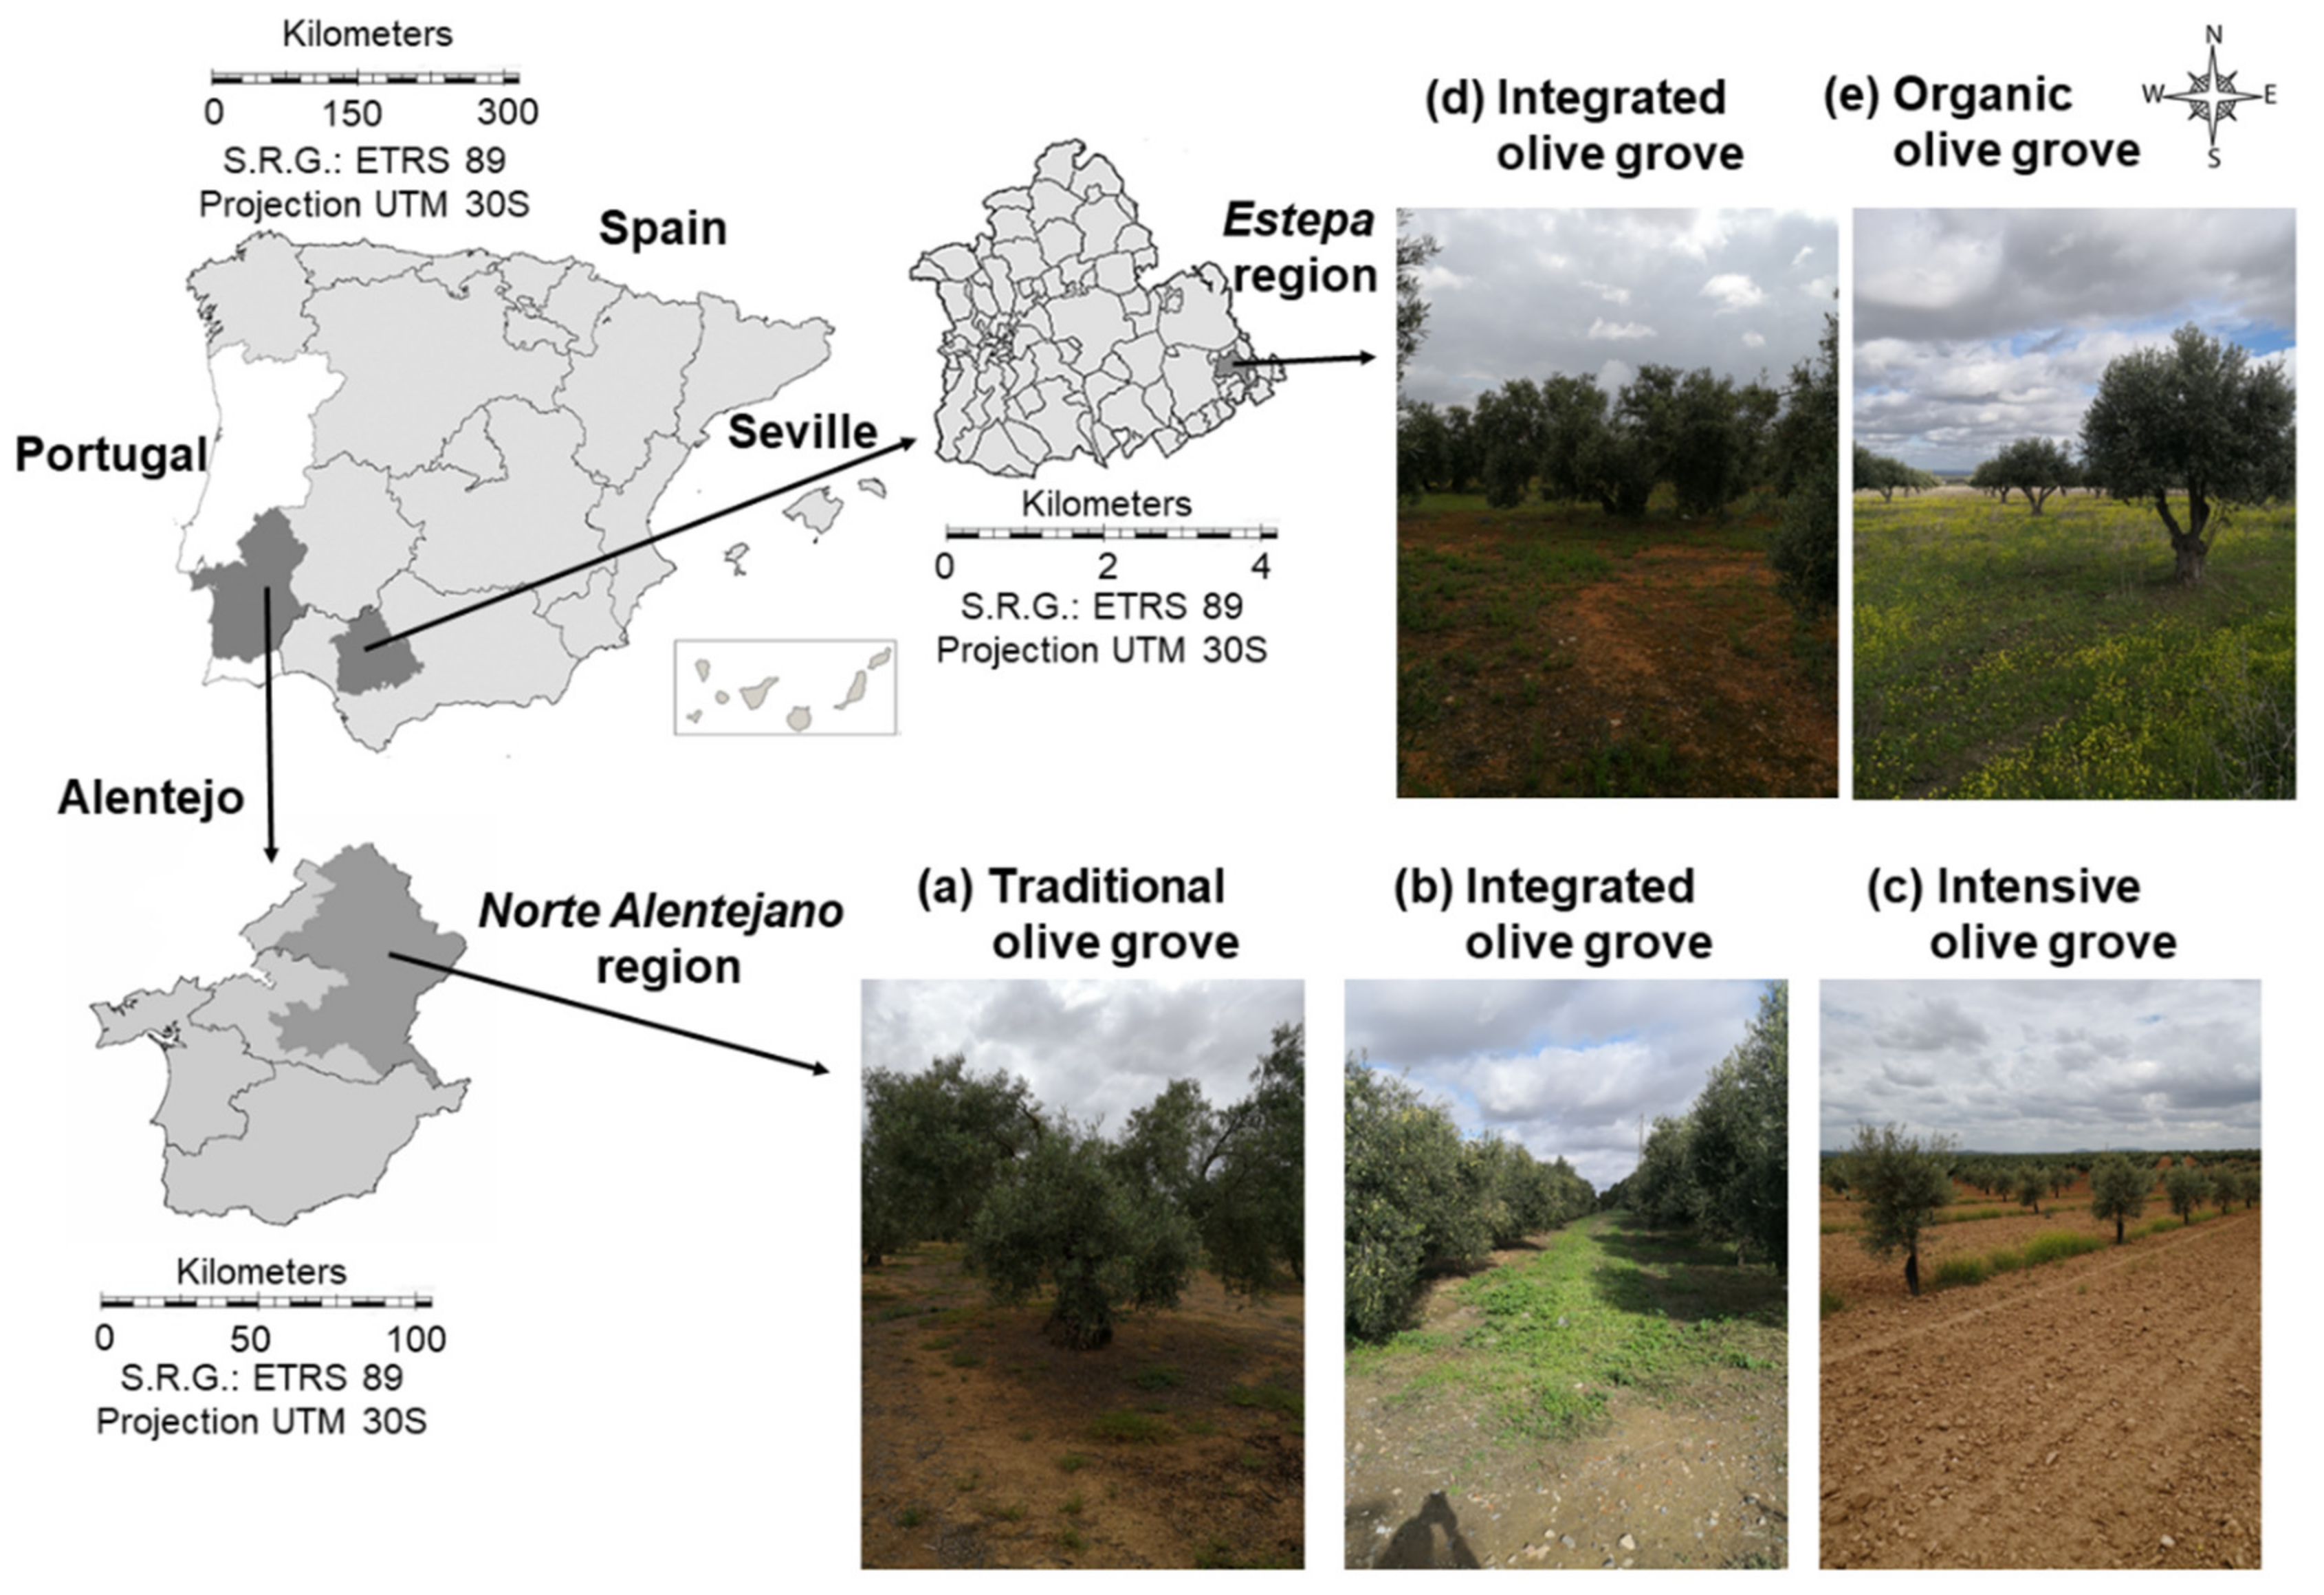 Agronomy Free Full Text A Comparative Analysis Of Soil Loss Tolerance And Productivity Of The Olive Groves In The Protected Designation Of Origin Pdo Areas Norte Alentejano Portugal And Estepa Andalusia